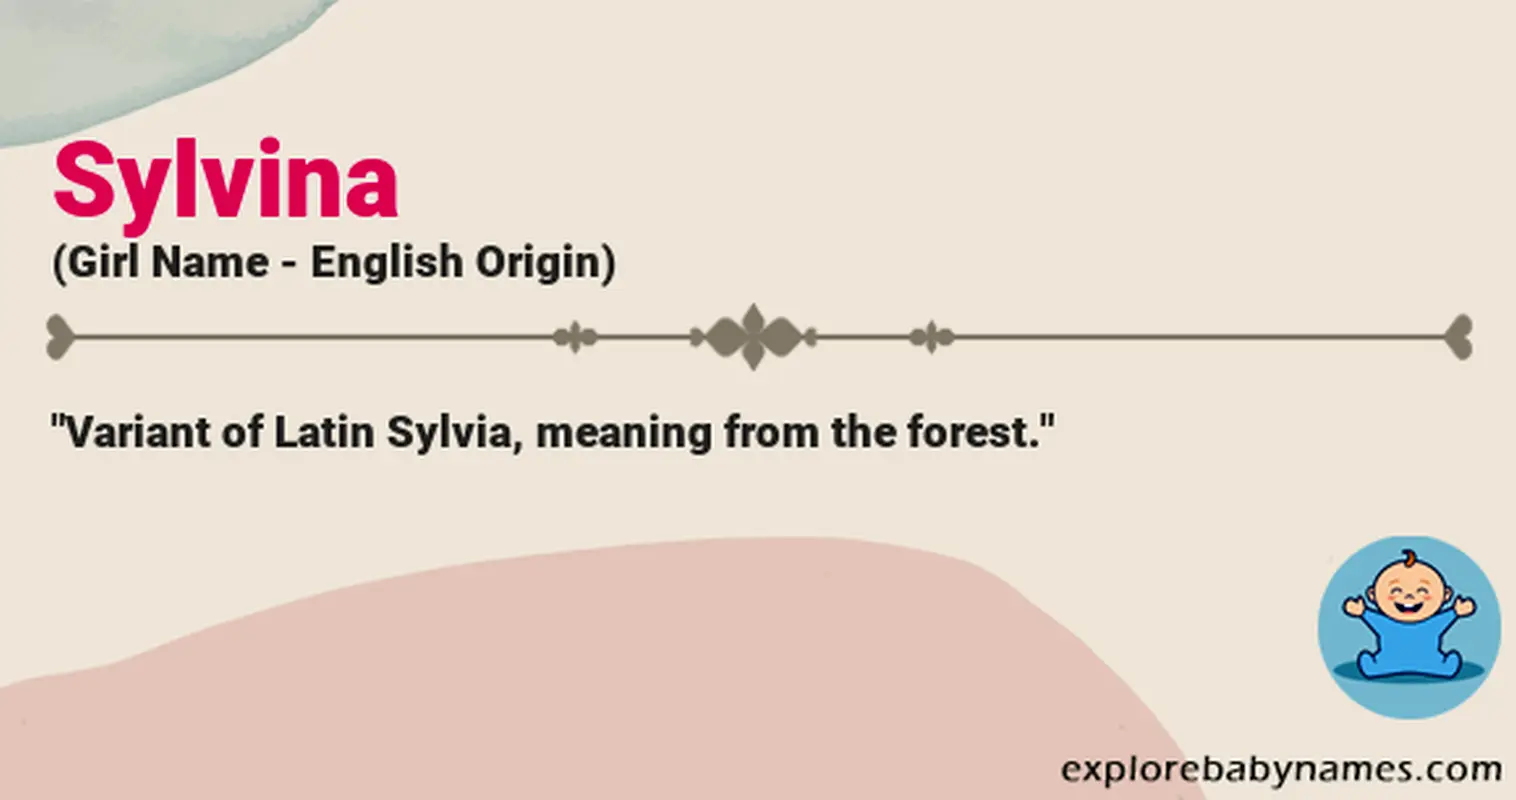 Meaning of Sylvina